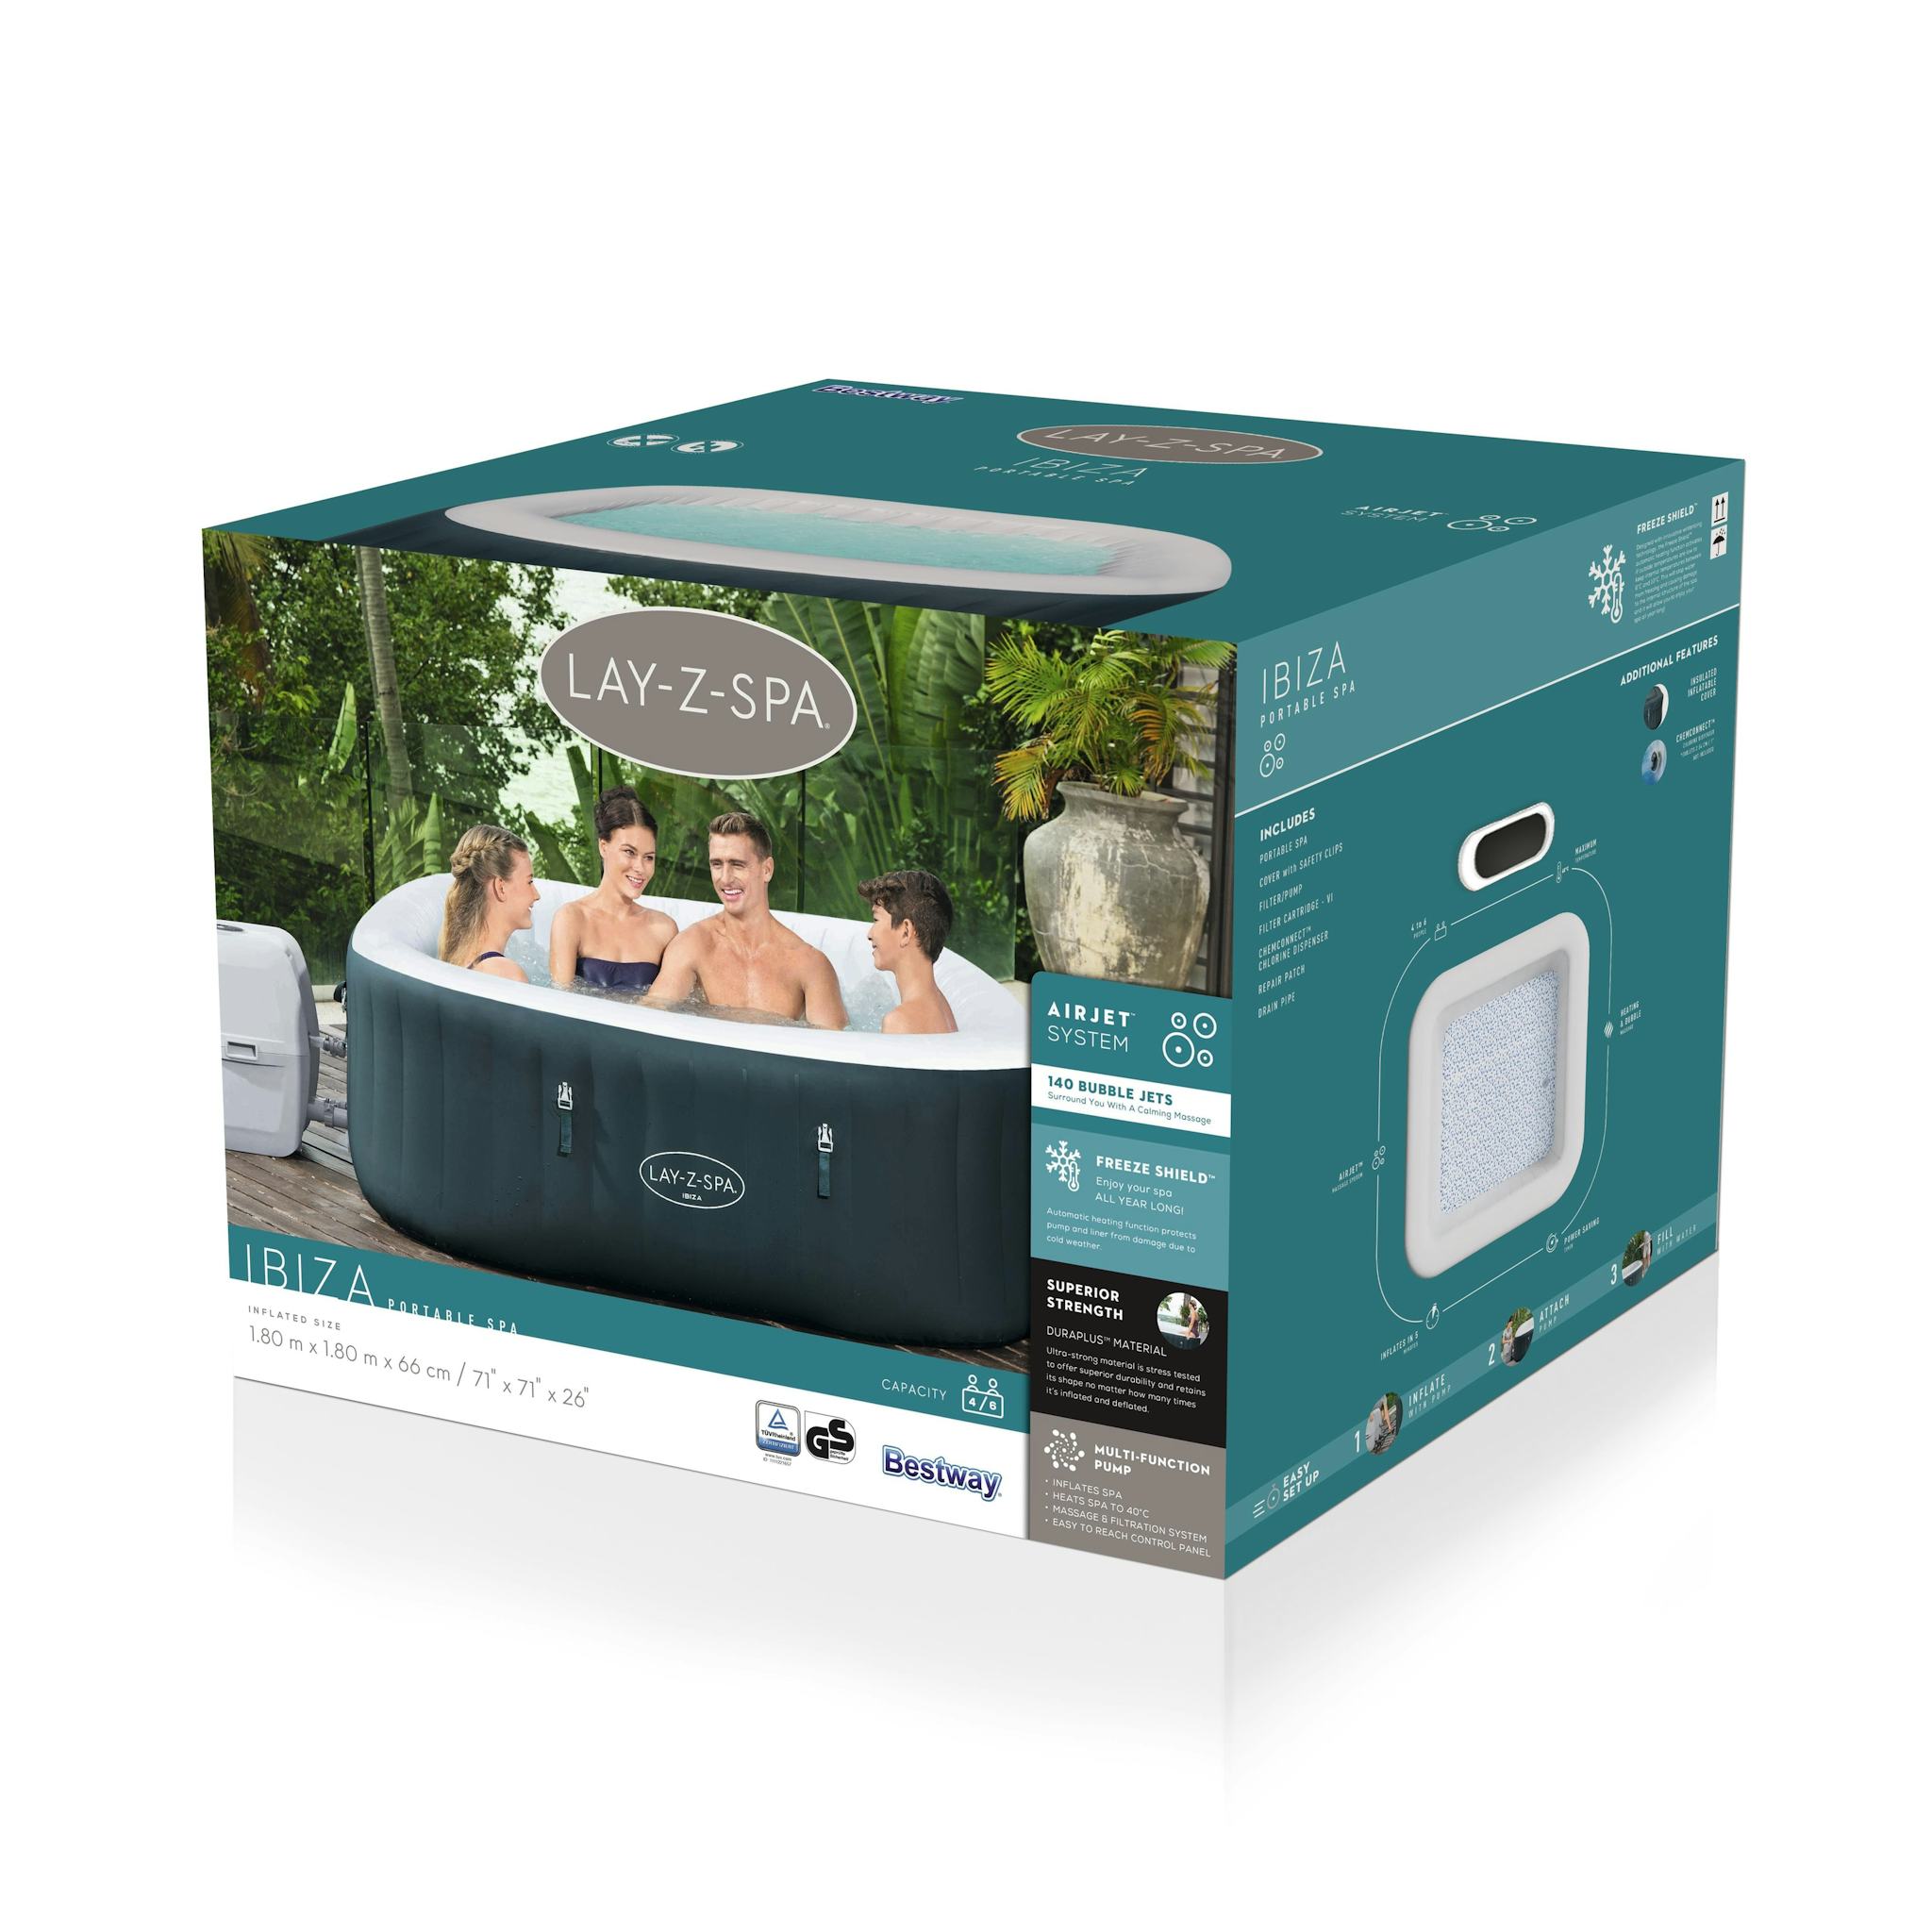 Spas Gonflables Spa gonflable carré Lay-Z-Spa Ibiza Airjet™ 4 - 6 personnes Bestway 17